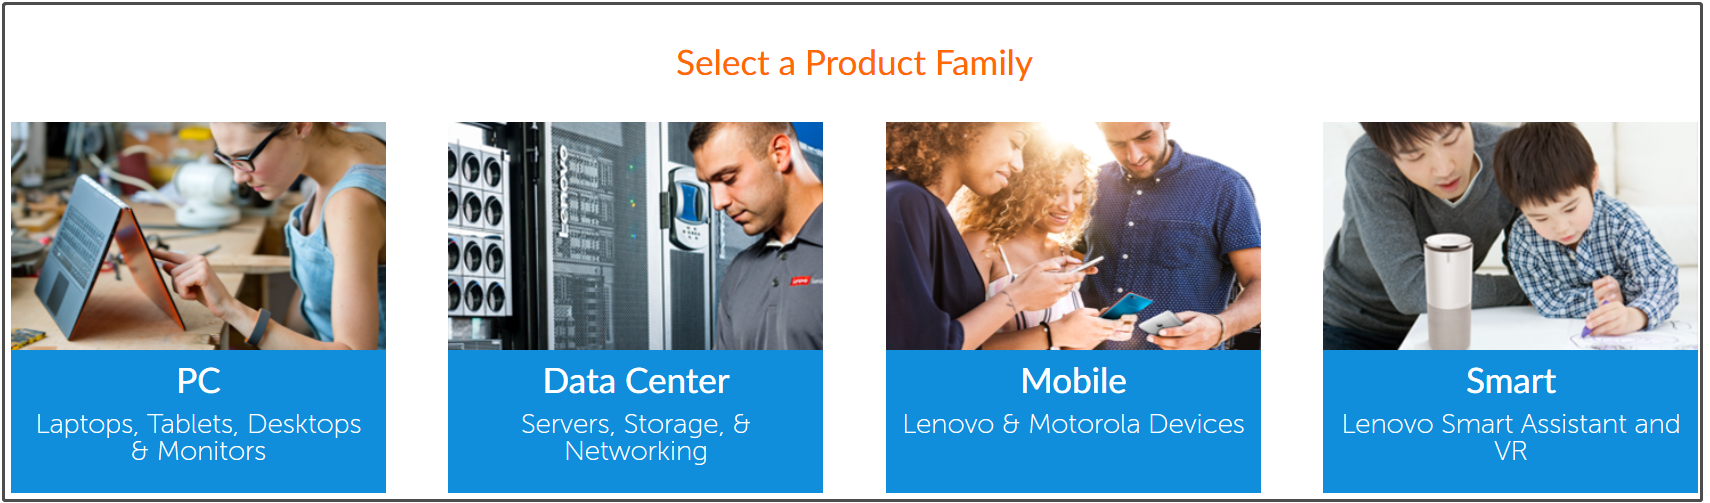 select a product family